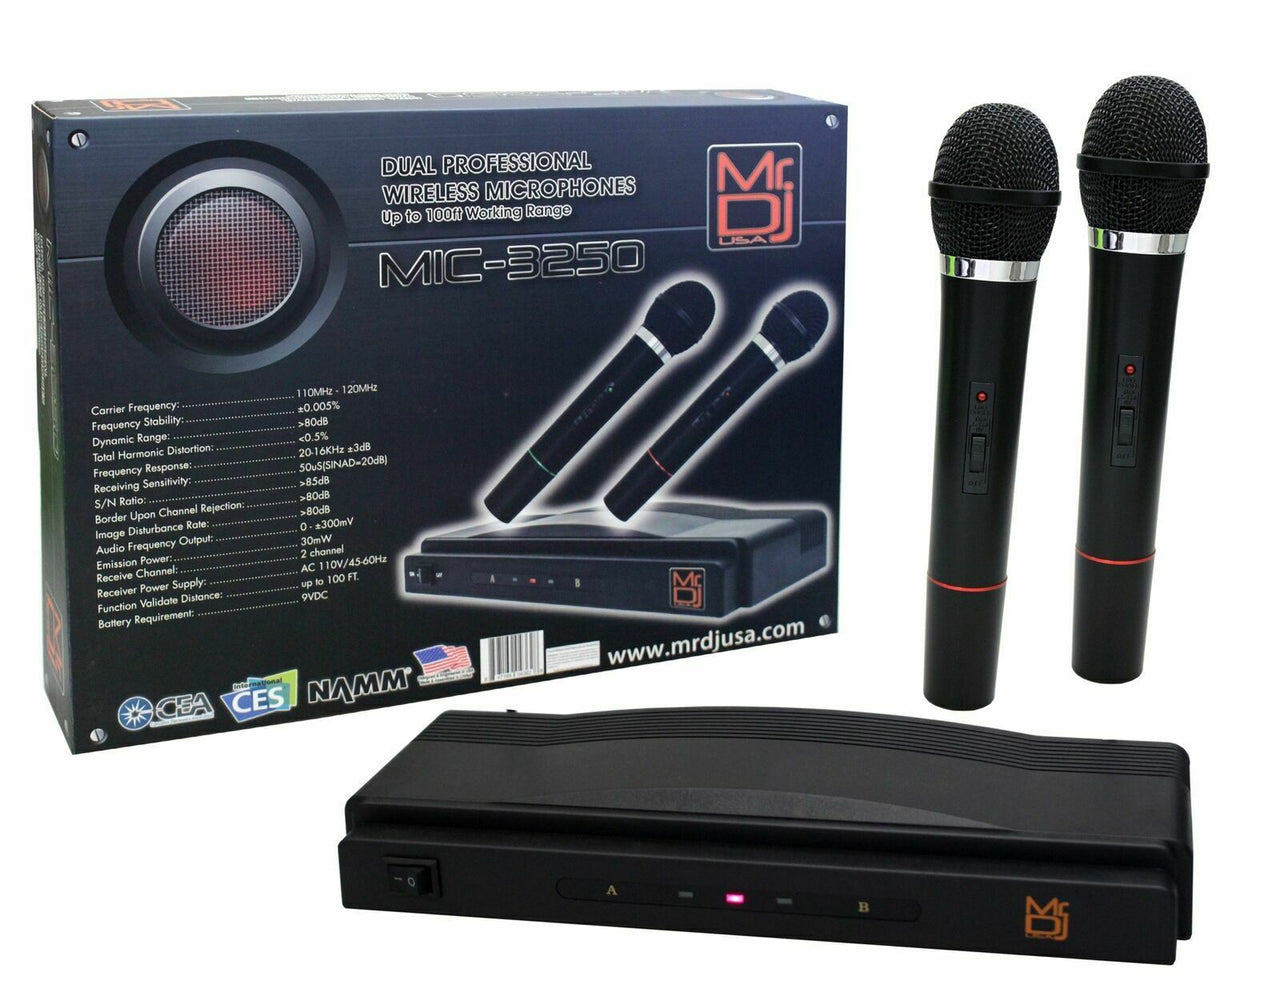 MR DJ MIC3250 Dual Channel RF Professional Wireless Microphone System Set with 2 Handheld Microphones, Receiver Base, 1/4'' Audio Connection Cable, Power Adapter - For Karaoke, PA, Public Event